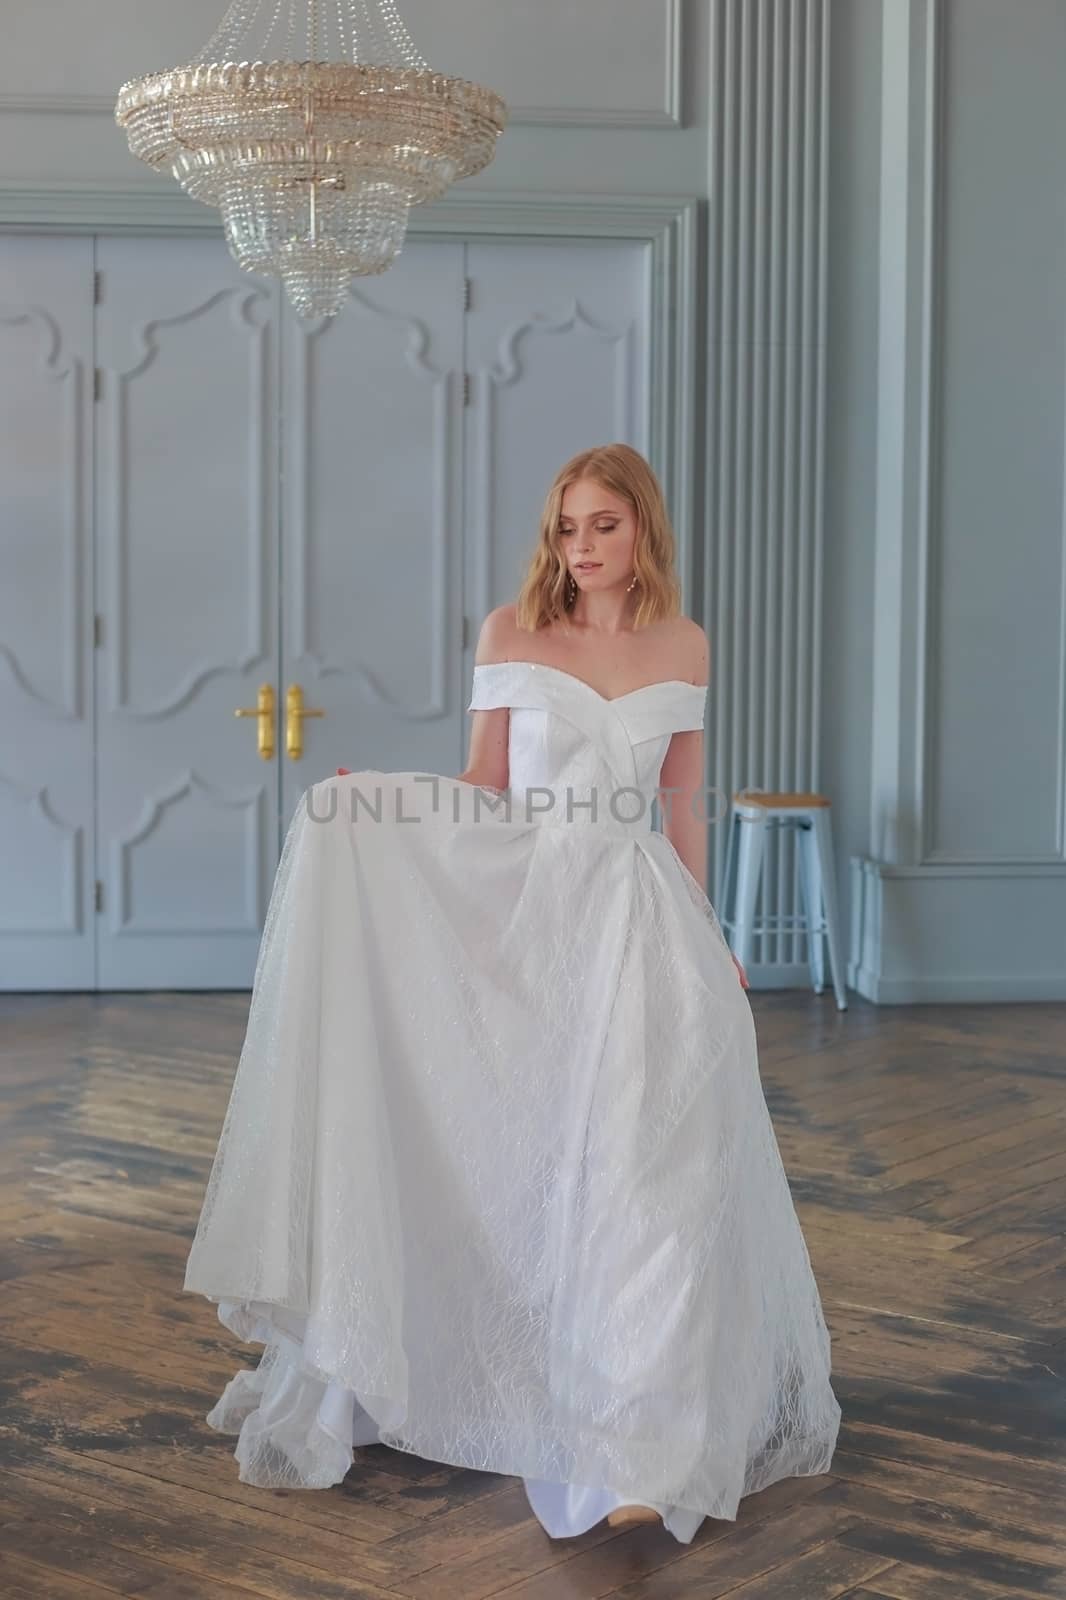 The bride in a beautiful white wedding dress enters the hall holding the hem of the dress